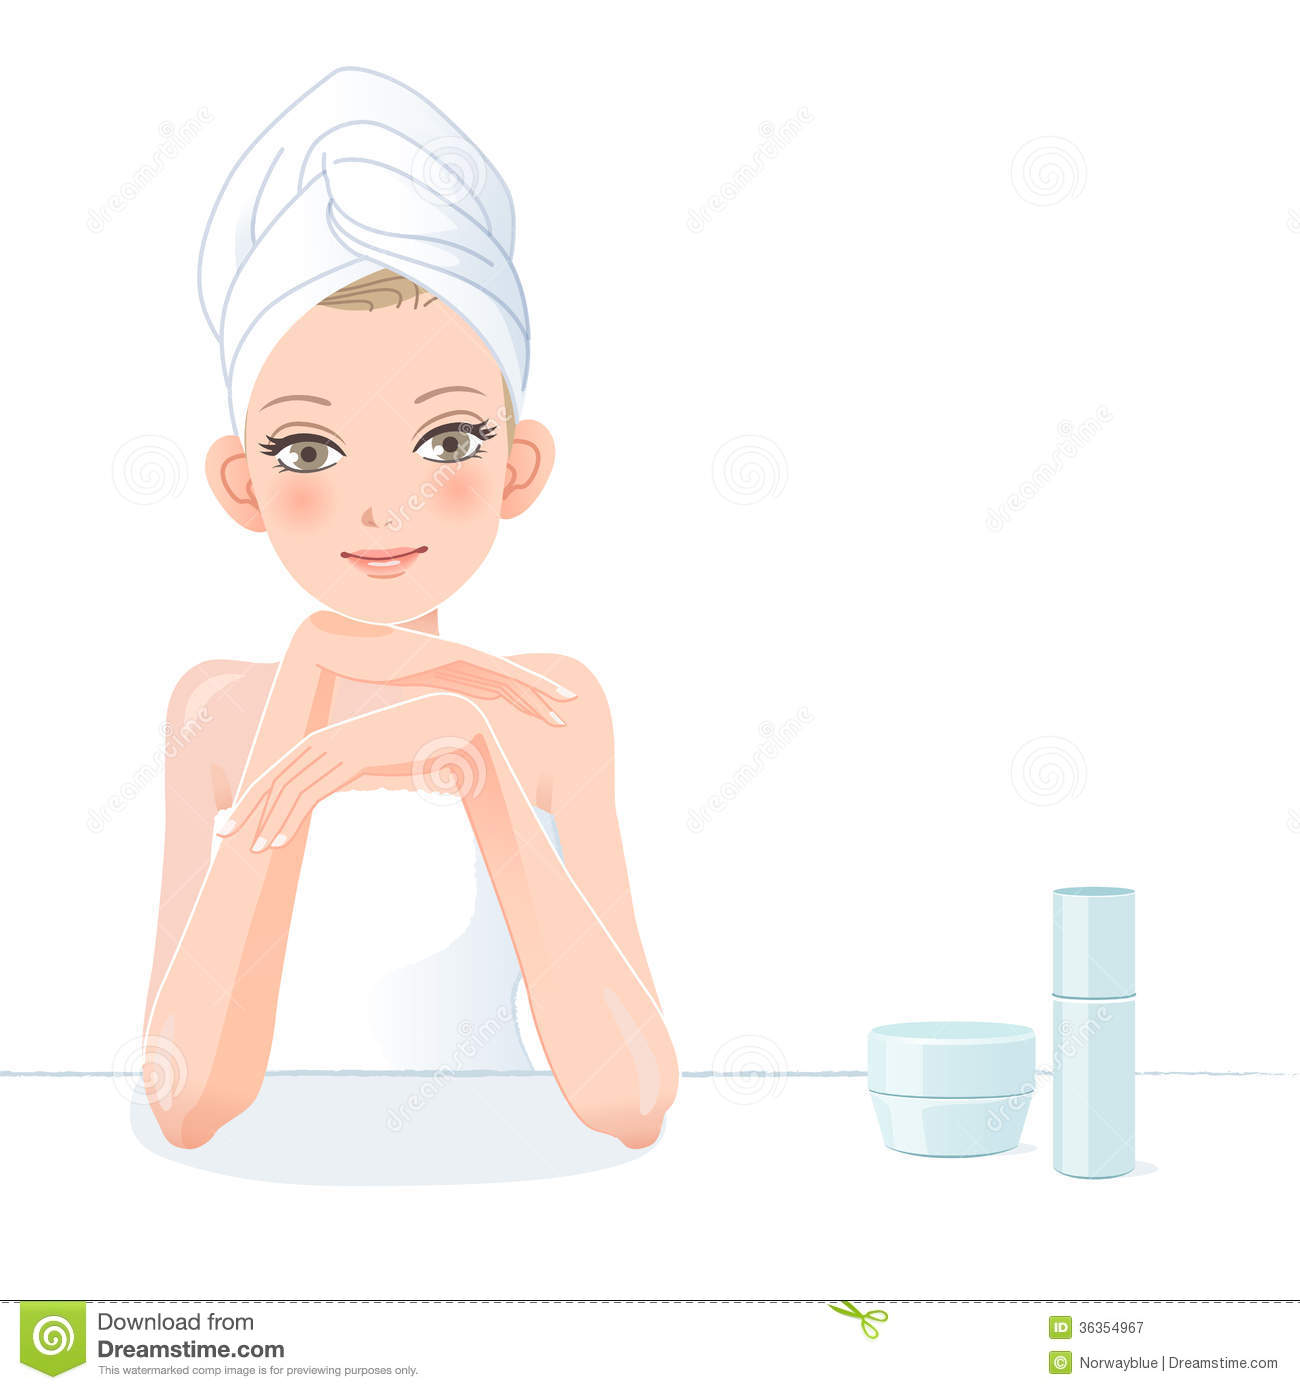 caring clipart woman